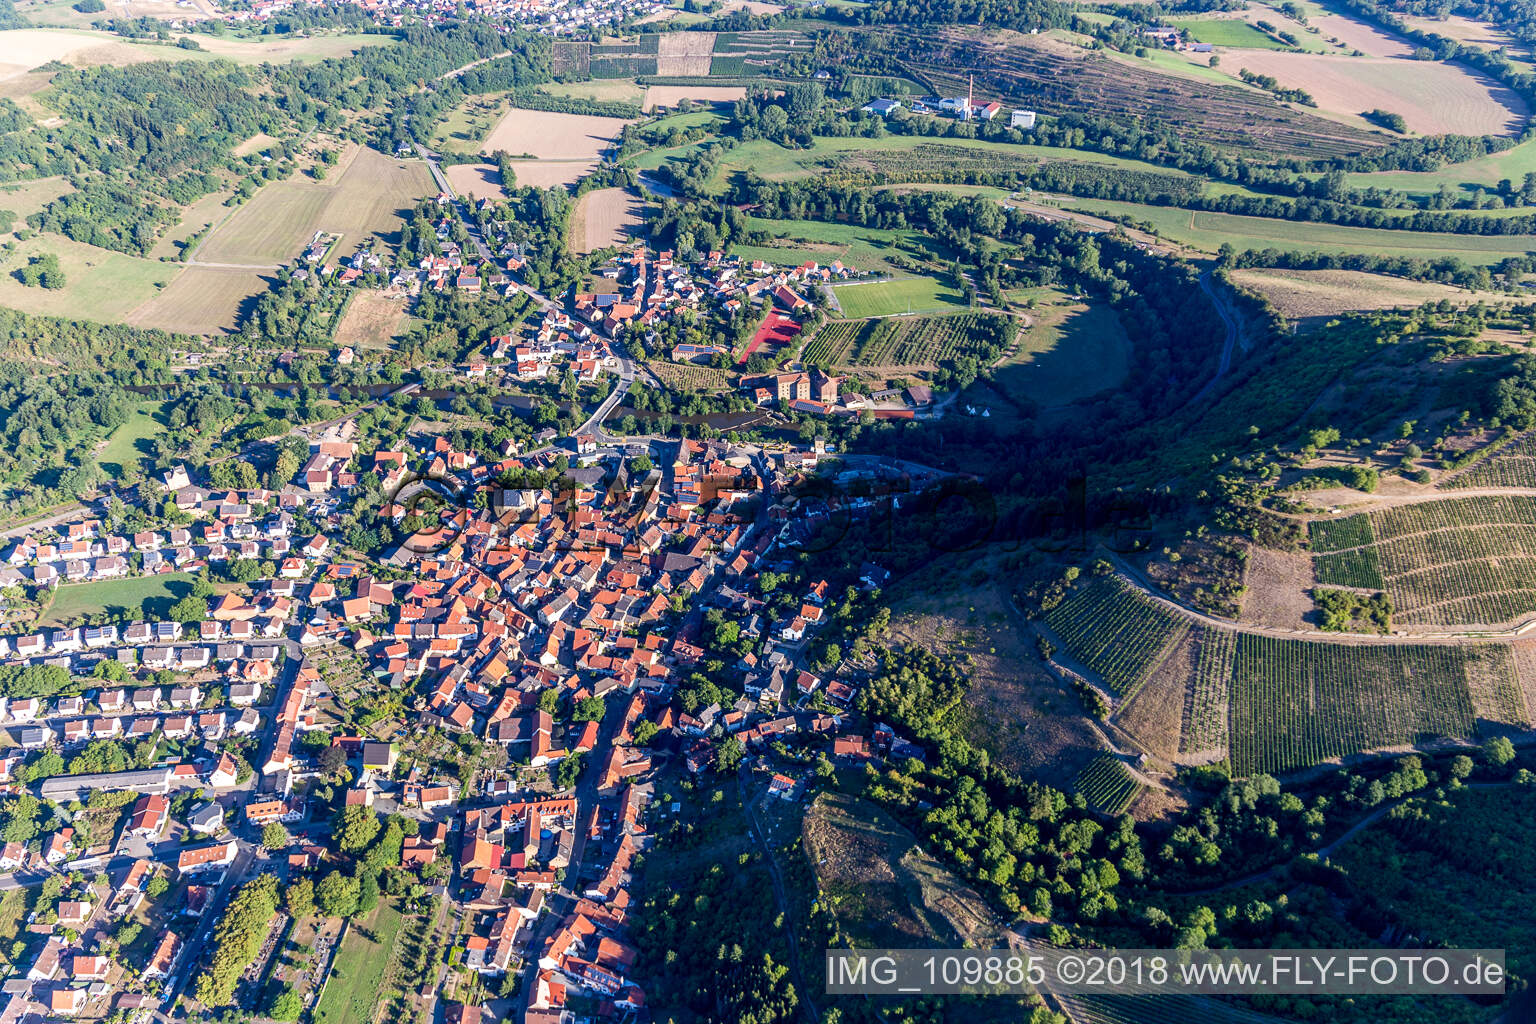 Odernheim am Glan in the state Rhineland-Palatinate, Germany seen from above